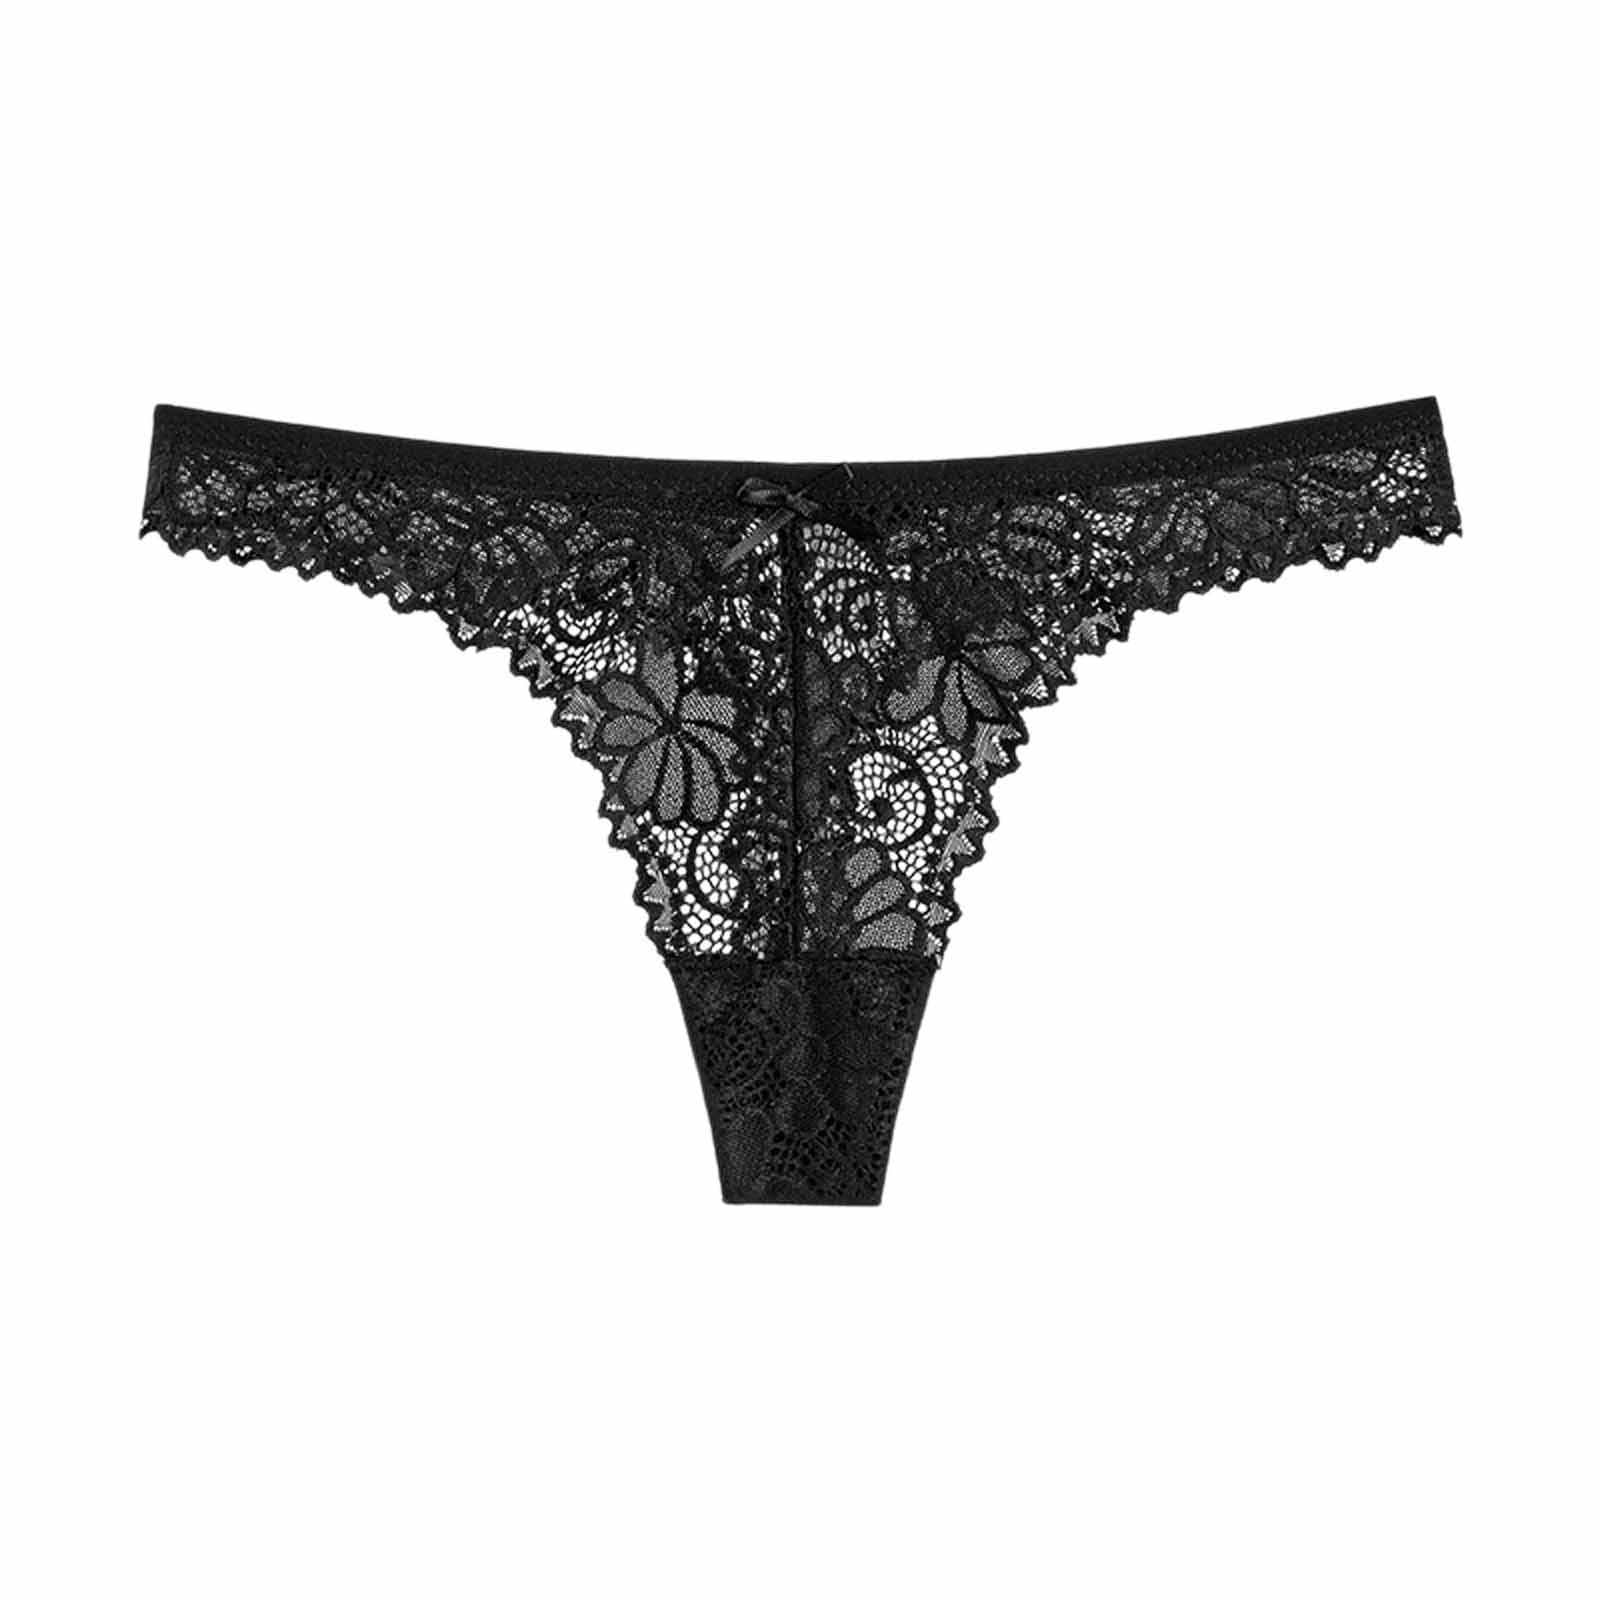 Efsteb Lace Thongs for Women Sexy Low Waist Briefs Lingerie Breathable  Underwear Ropa Interior Mujer G Thong Sexy Comfy Panties Transparent Ladies  Lace Hollow Out Underwear Red 